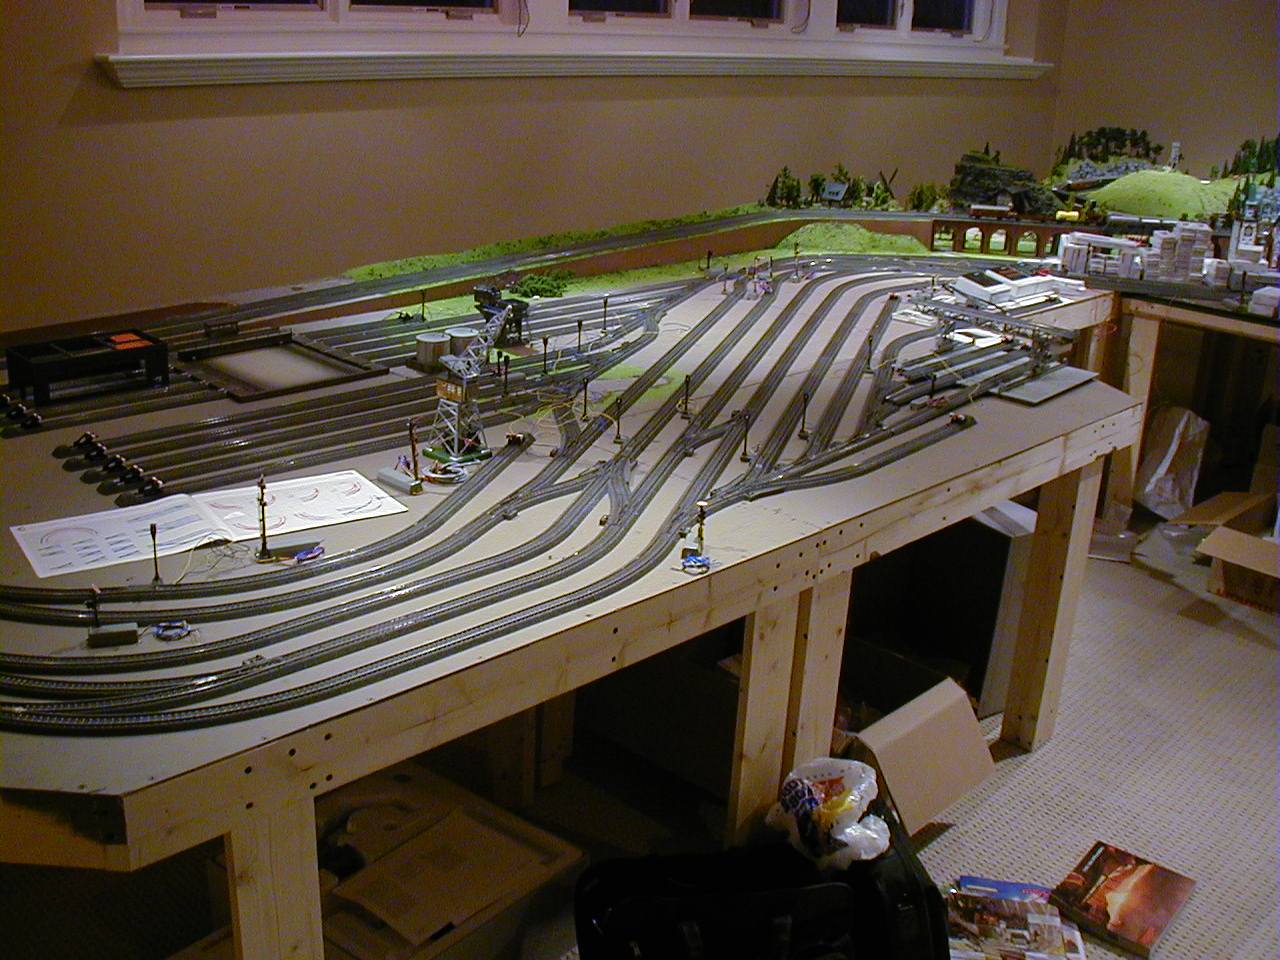 These railroads are designed and assembled wonderfully and extremely 